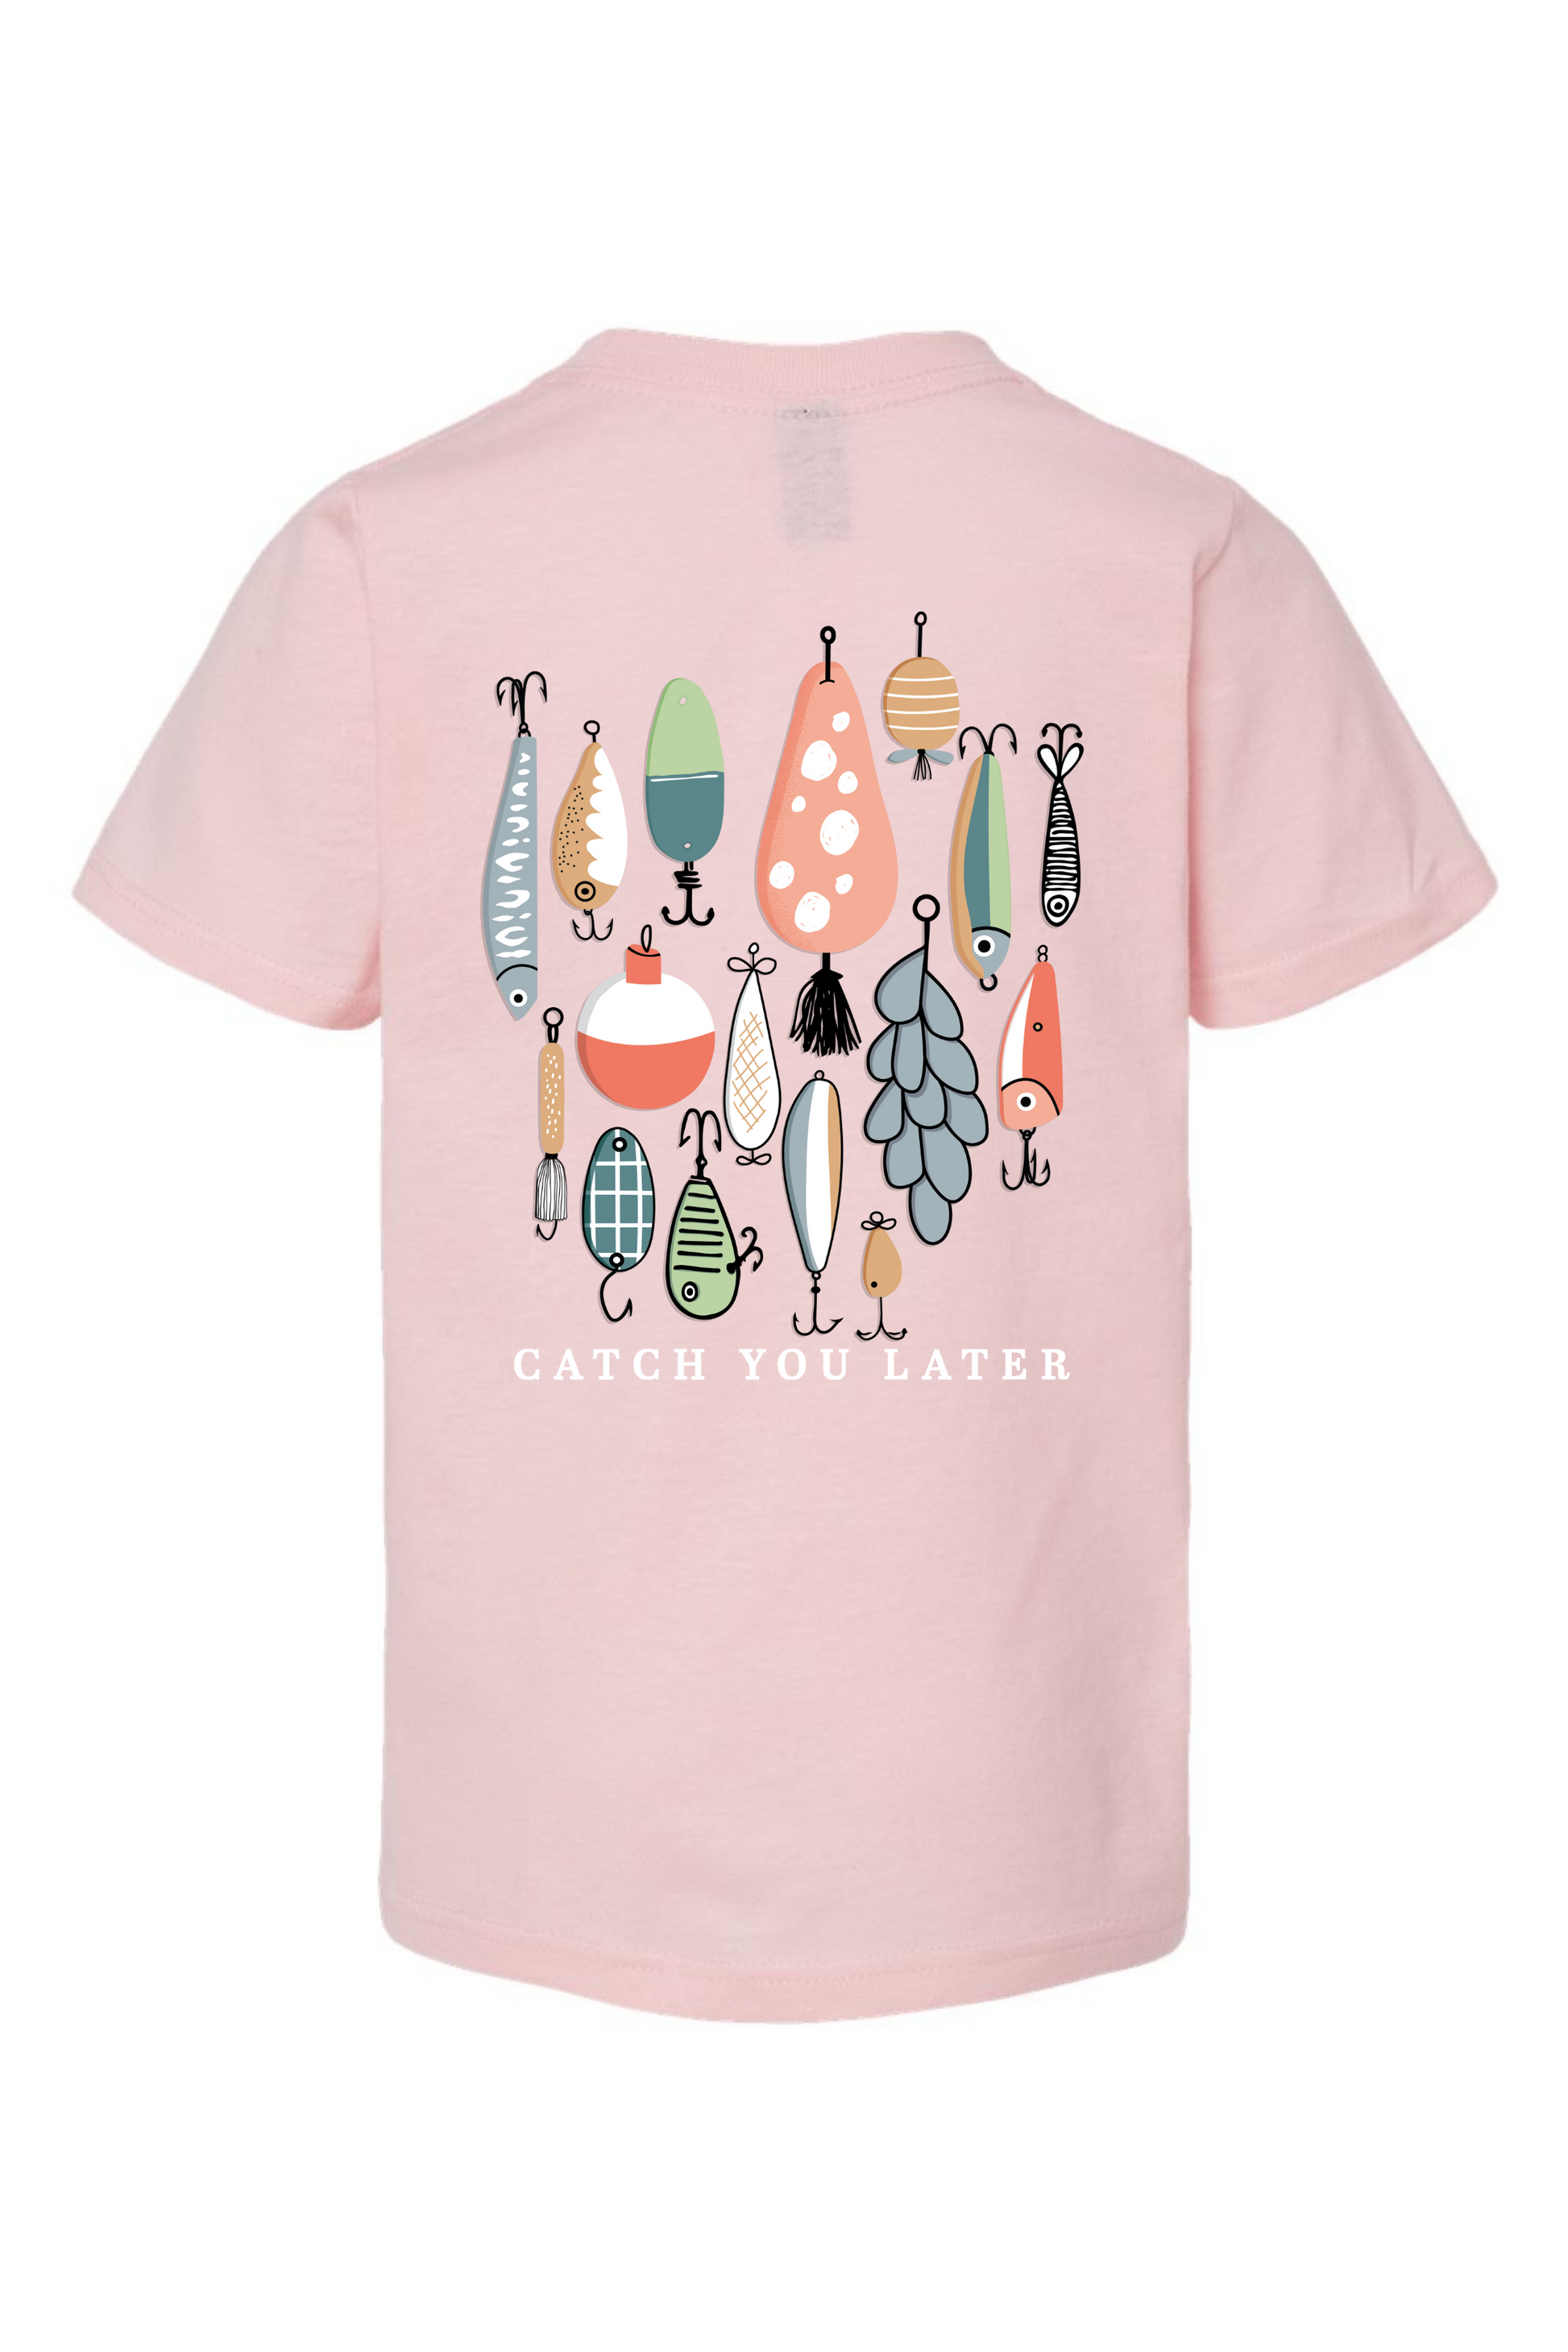 Catch You Later | Girl's Tee-Sister Shirts-Sister Shirts, Cute & Custom Tees for Mama & Littles in Trussville, Alabama.